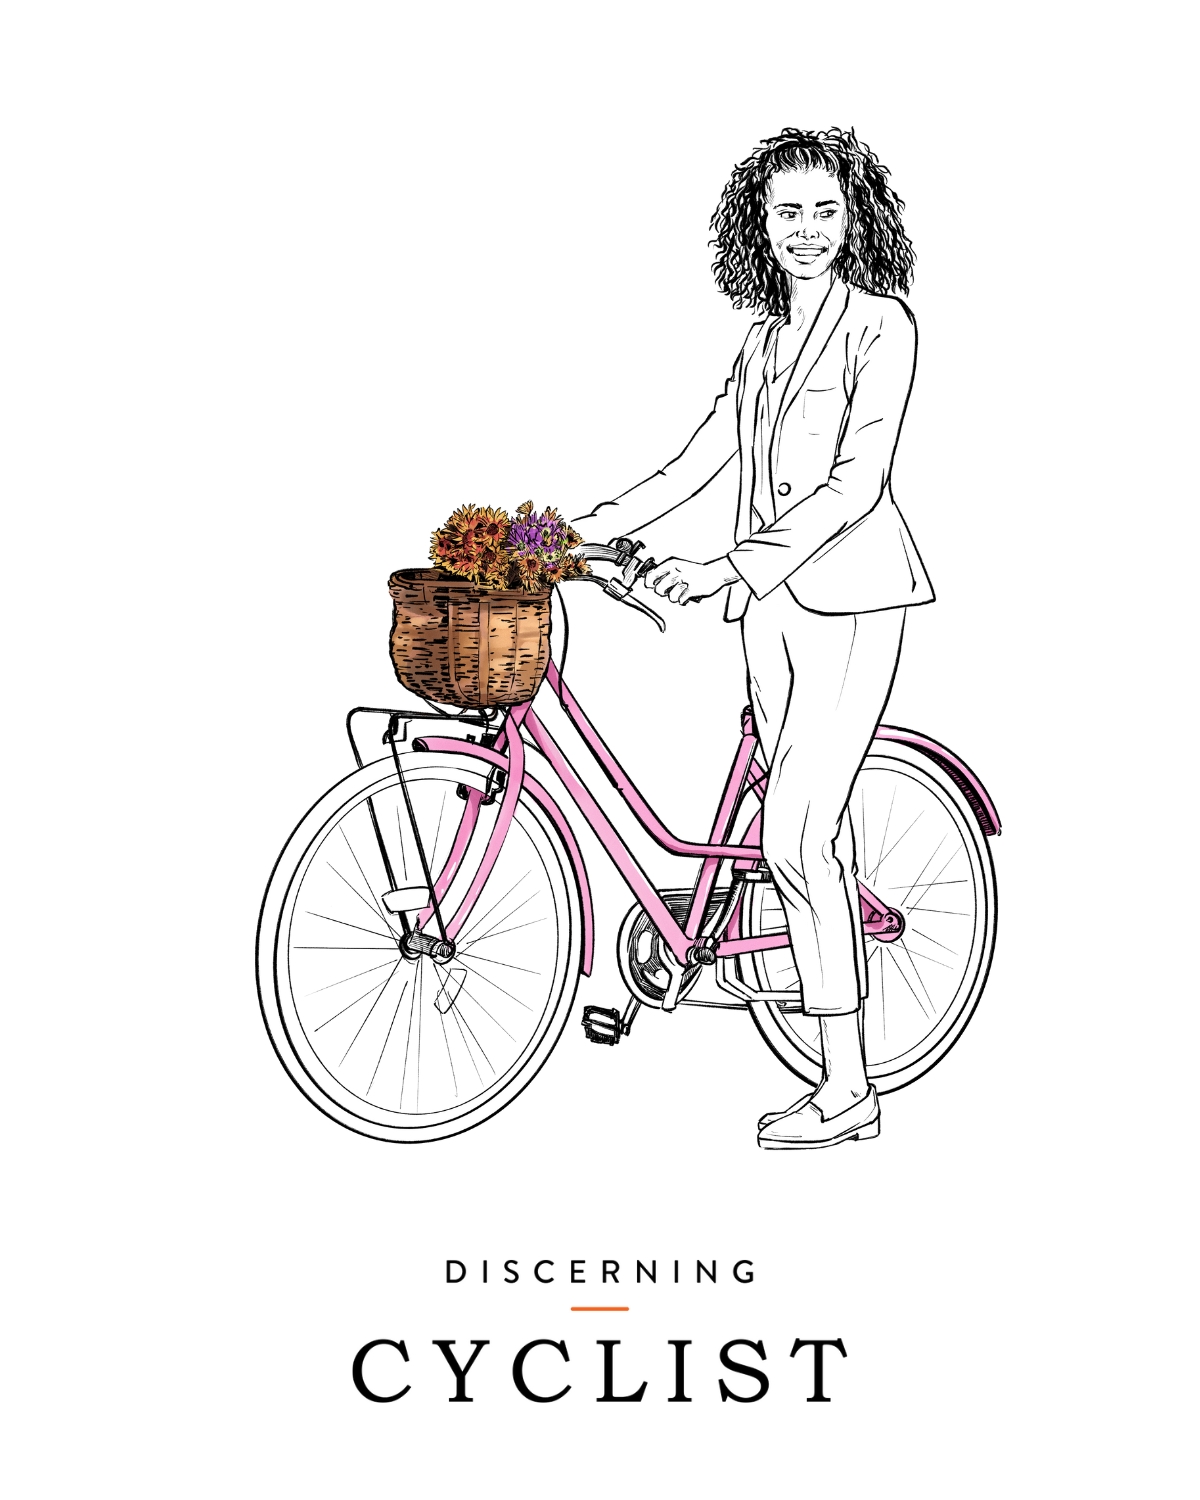 Female wearing suit cycling illustration